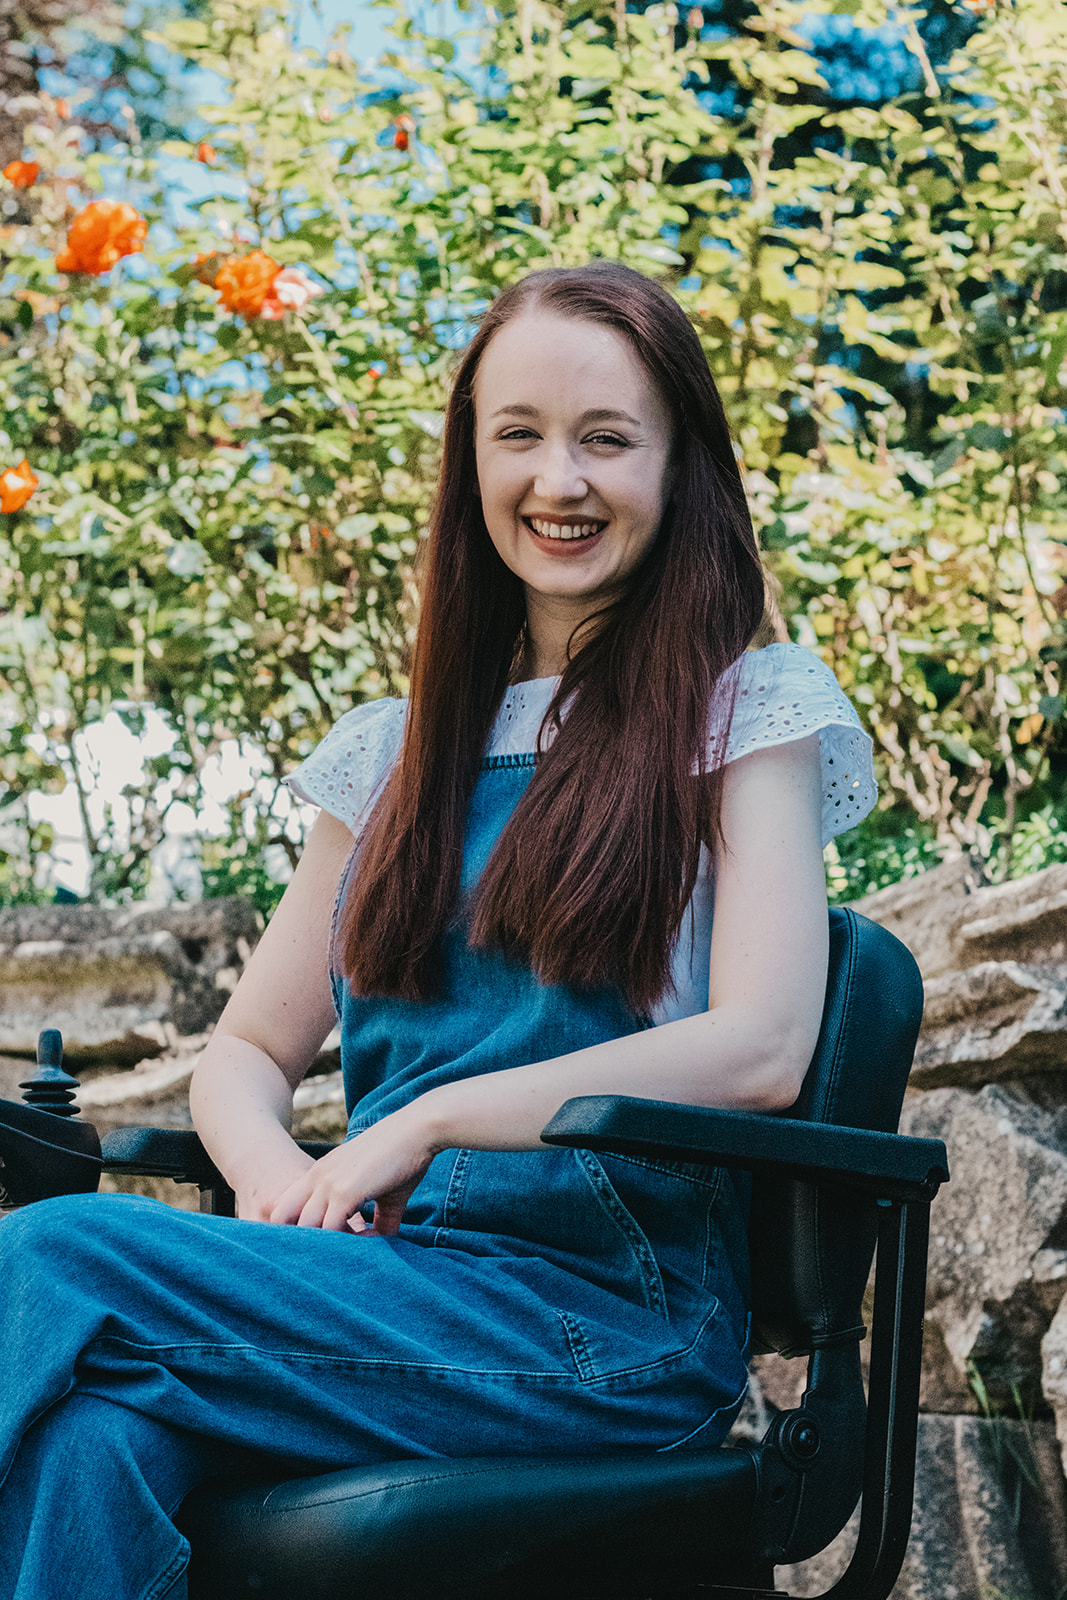 Headshot of Pippa outdoors in her power-chair, hands on her lap and smiling. She's wearing soft blue denim dungarees with a white top with floral sleeves, long brown hair down.